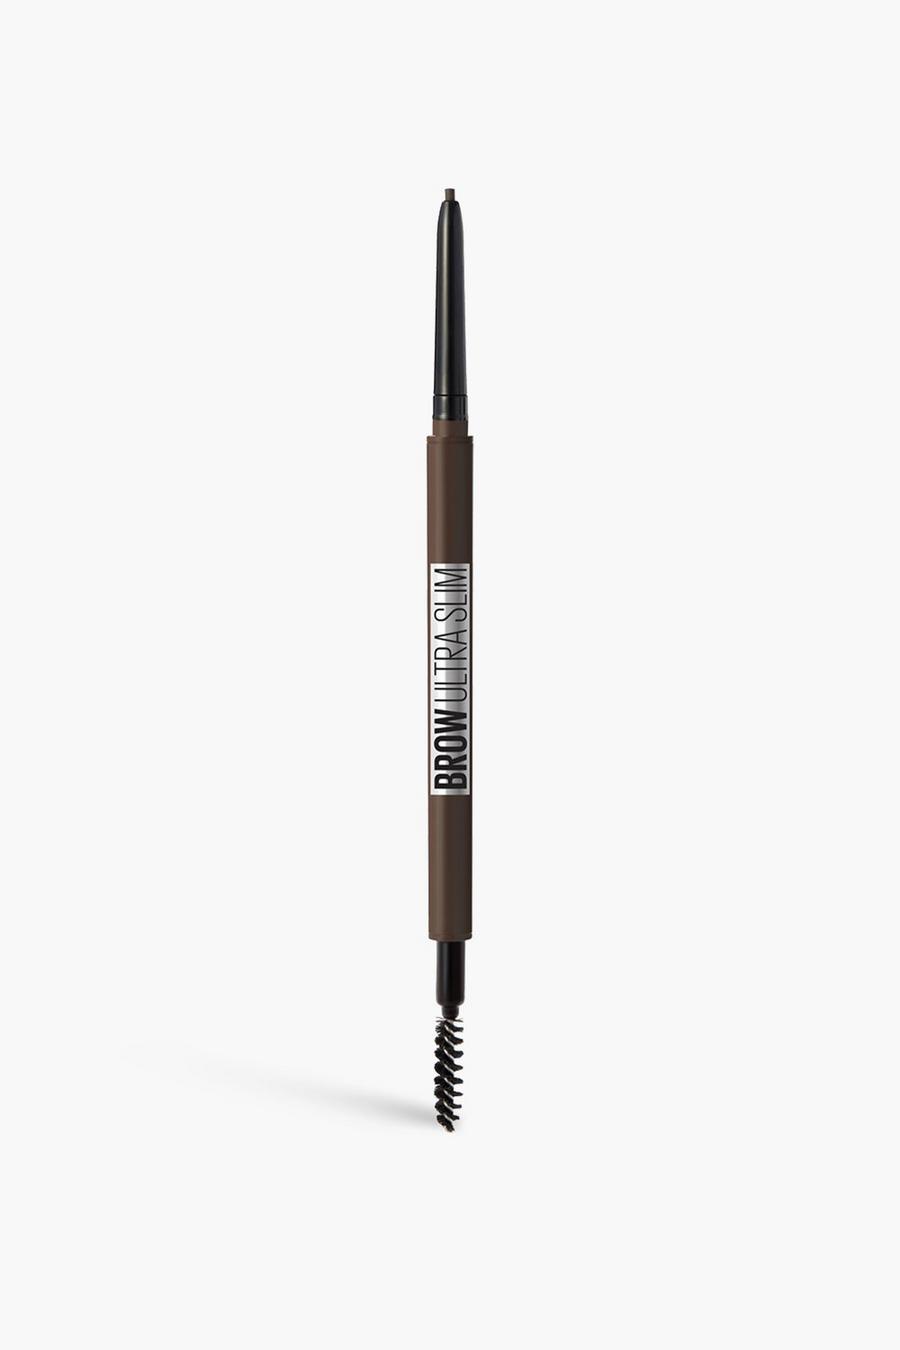 Maybelline Express Brow Pencil - 05 Black Brown